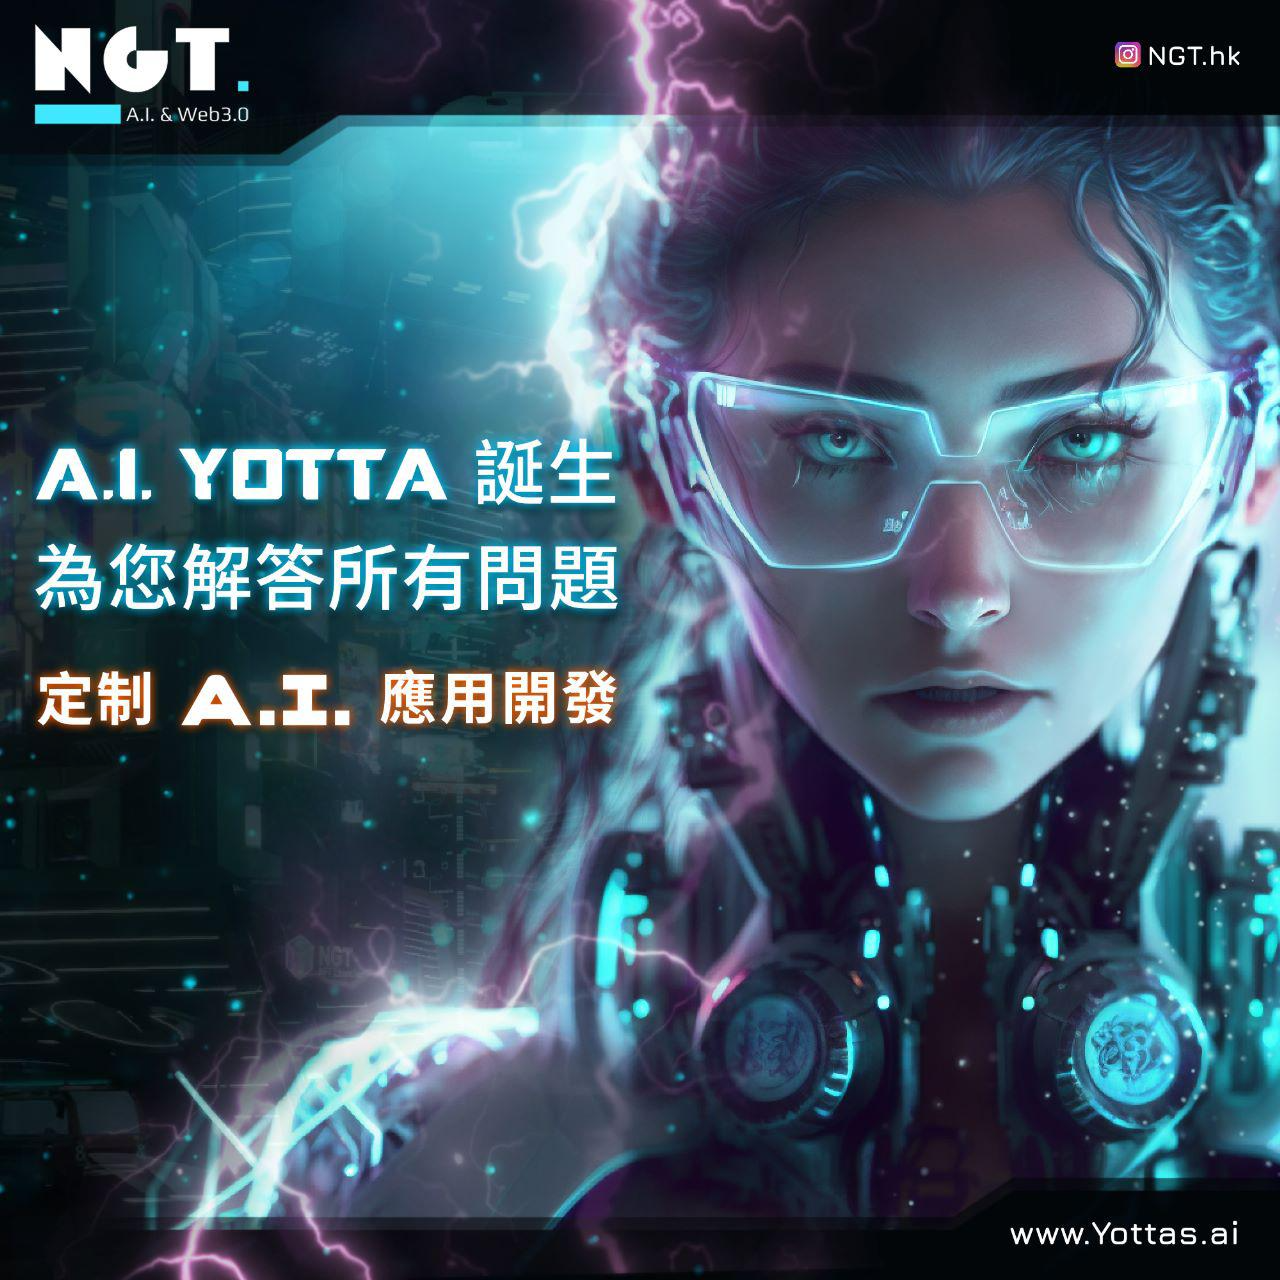 📍Custom A.I. Application
Build your own A.l. / Machine Learning models with us.

www.Yottas.ai